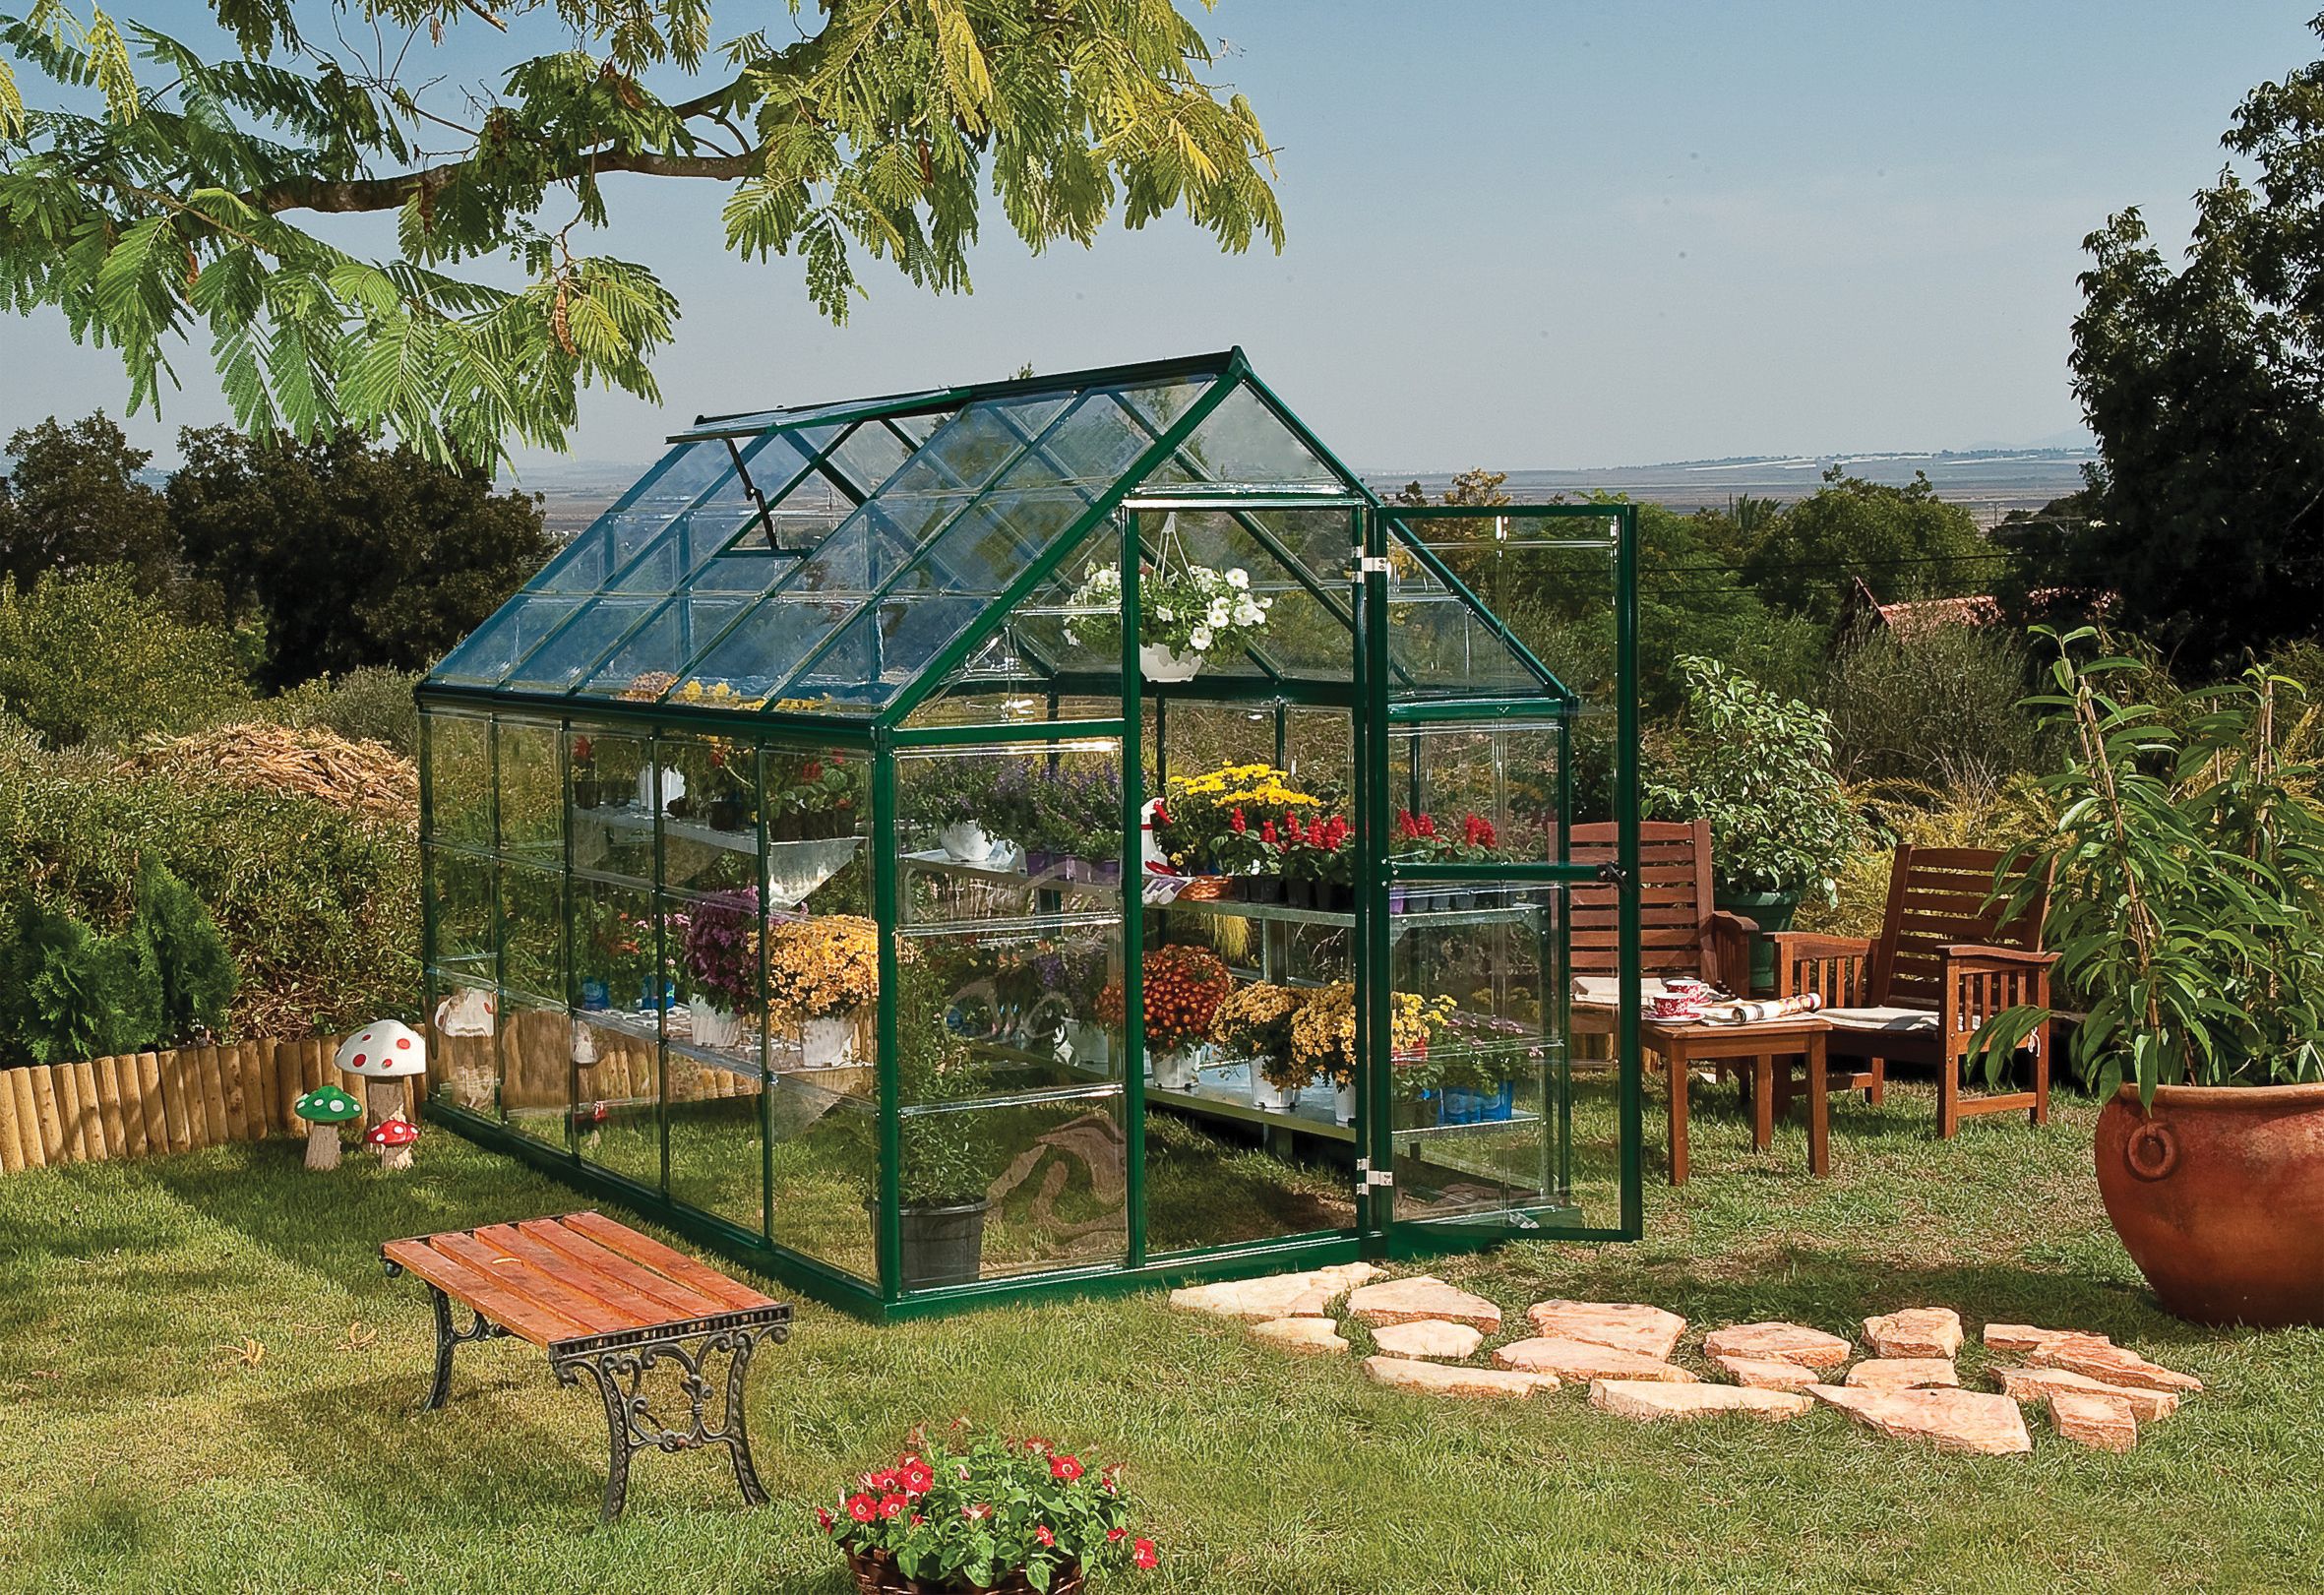 Palram Green Canopia Harmony Large Aluminium Apex Greenhouse with Polycarbonate Panels - 6 x 10ft